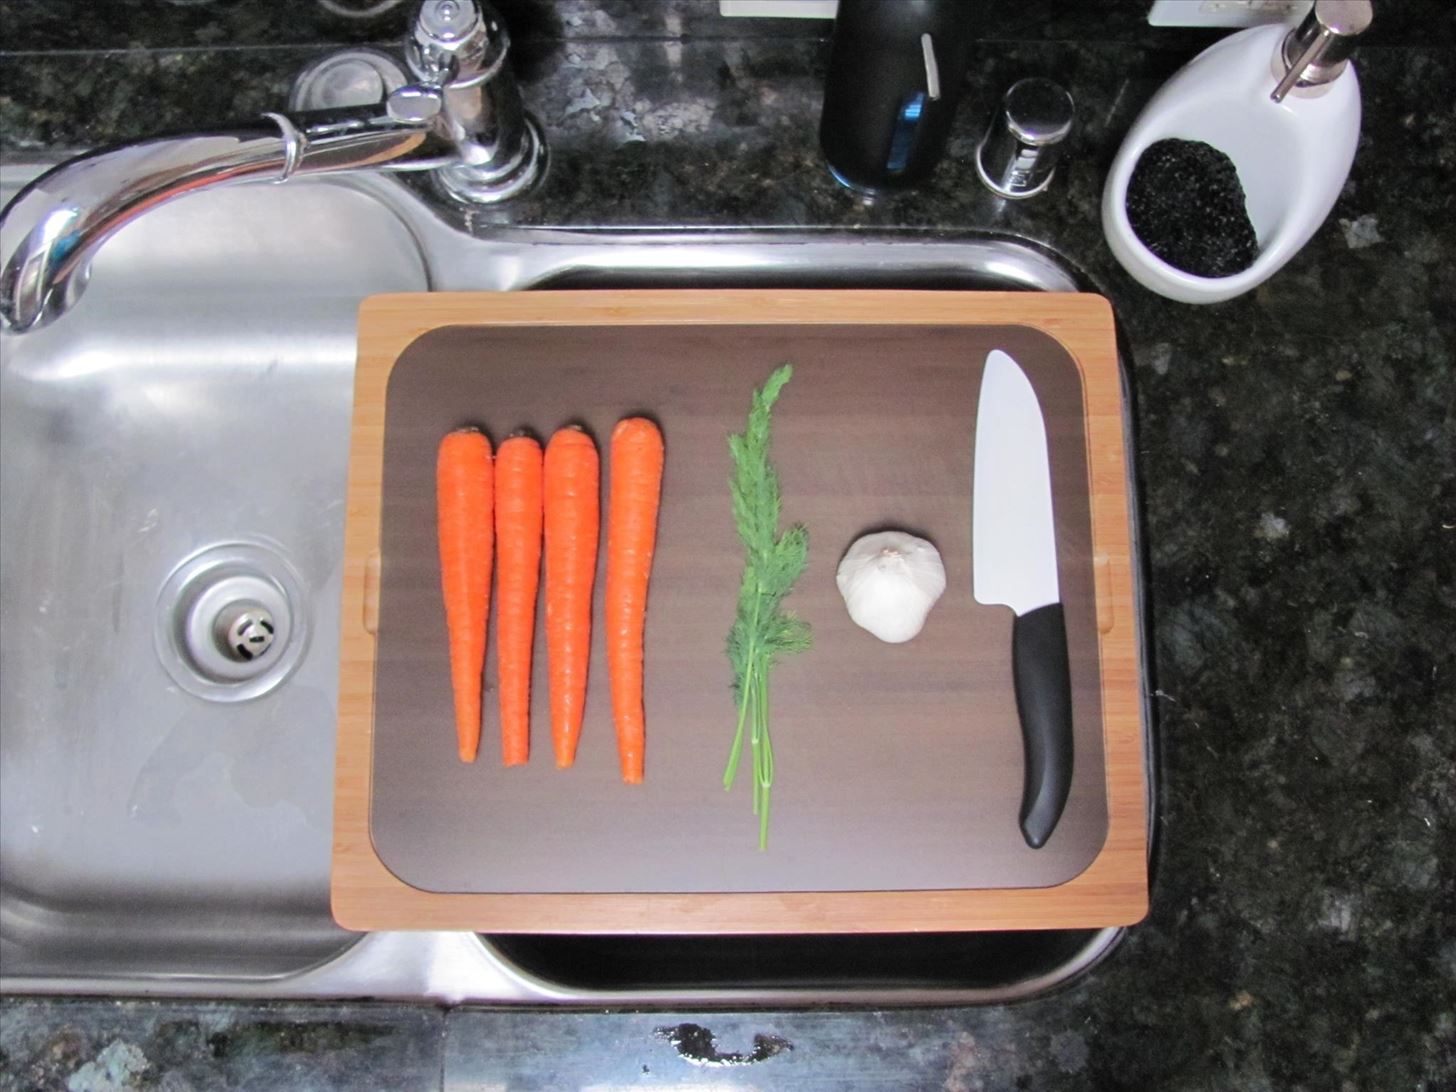 Countertop Hacking: 5 Ways to Increase Your Workspace in a Tiny Kitchen